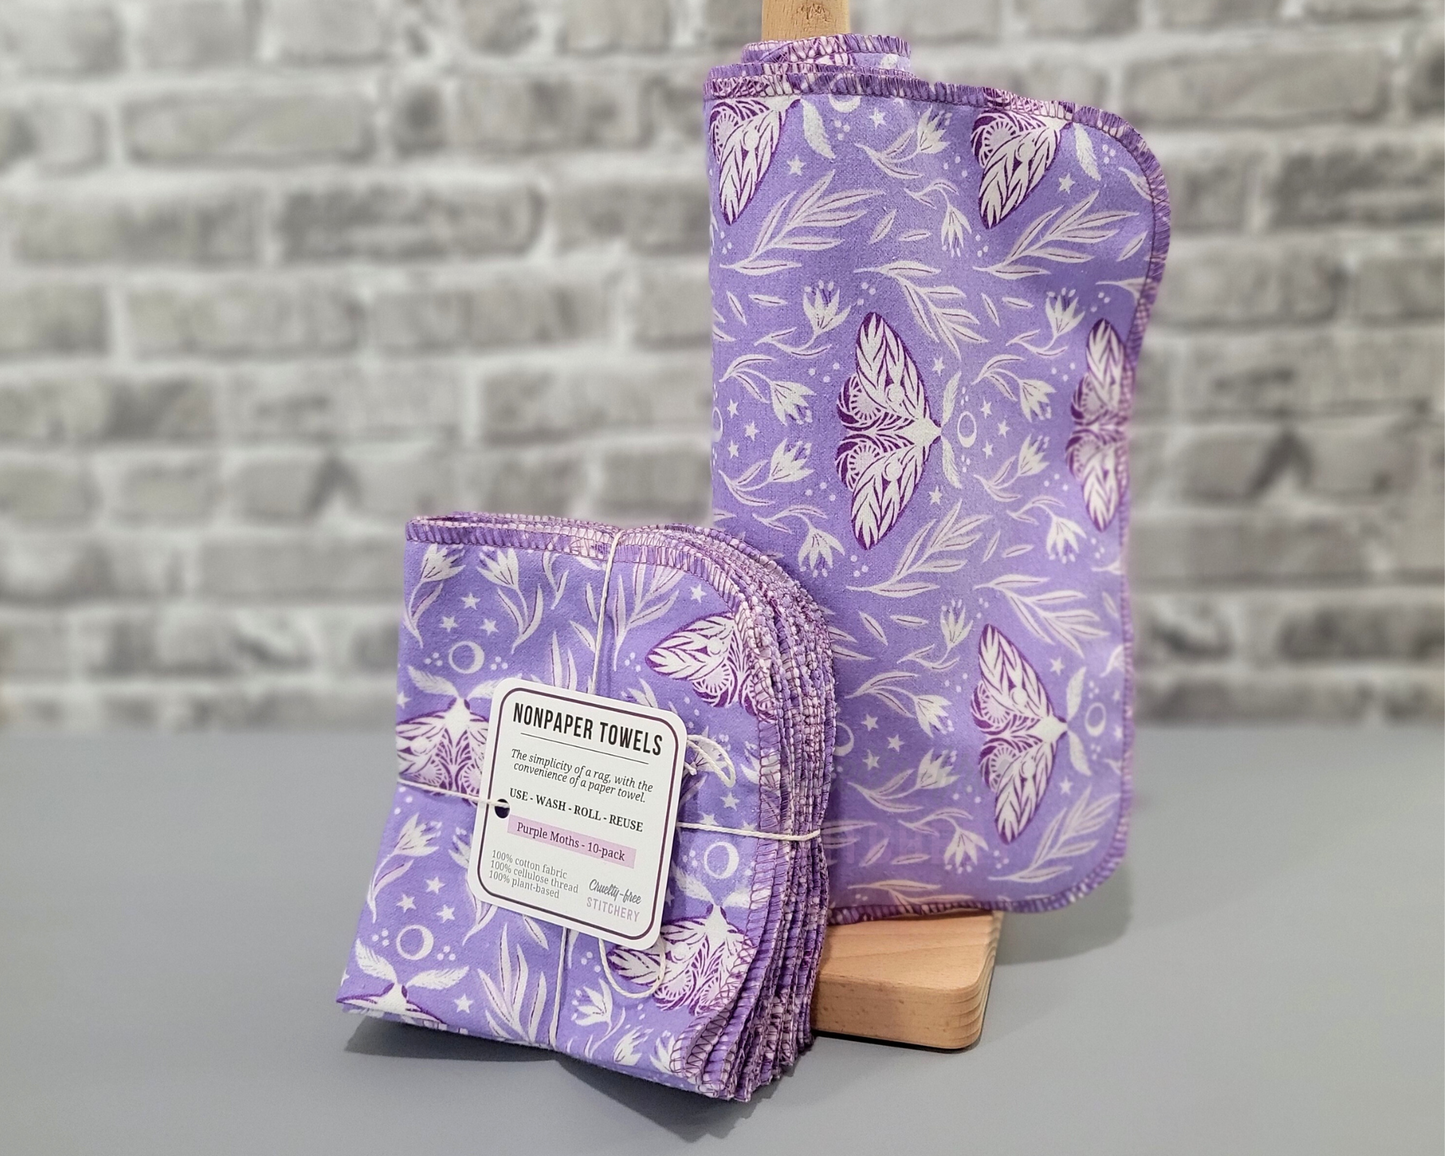 Purple Moths NonPaper Towels. A roll of light purple cloths with darker purple moths and ethereal floral design, next to a bundled pack.